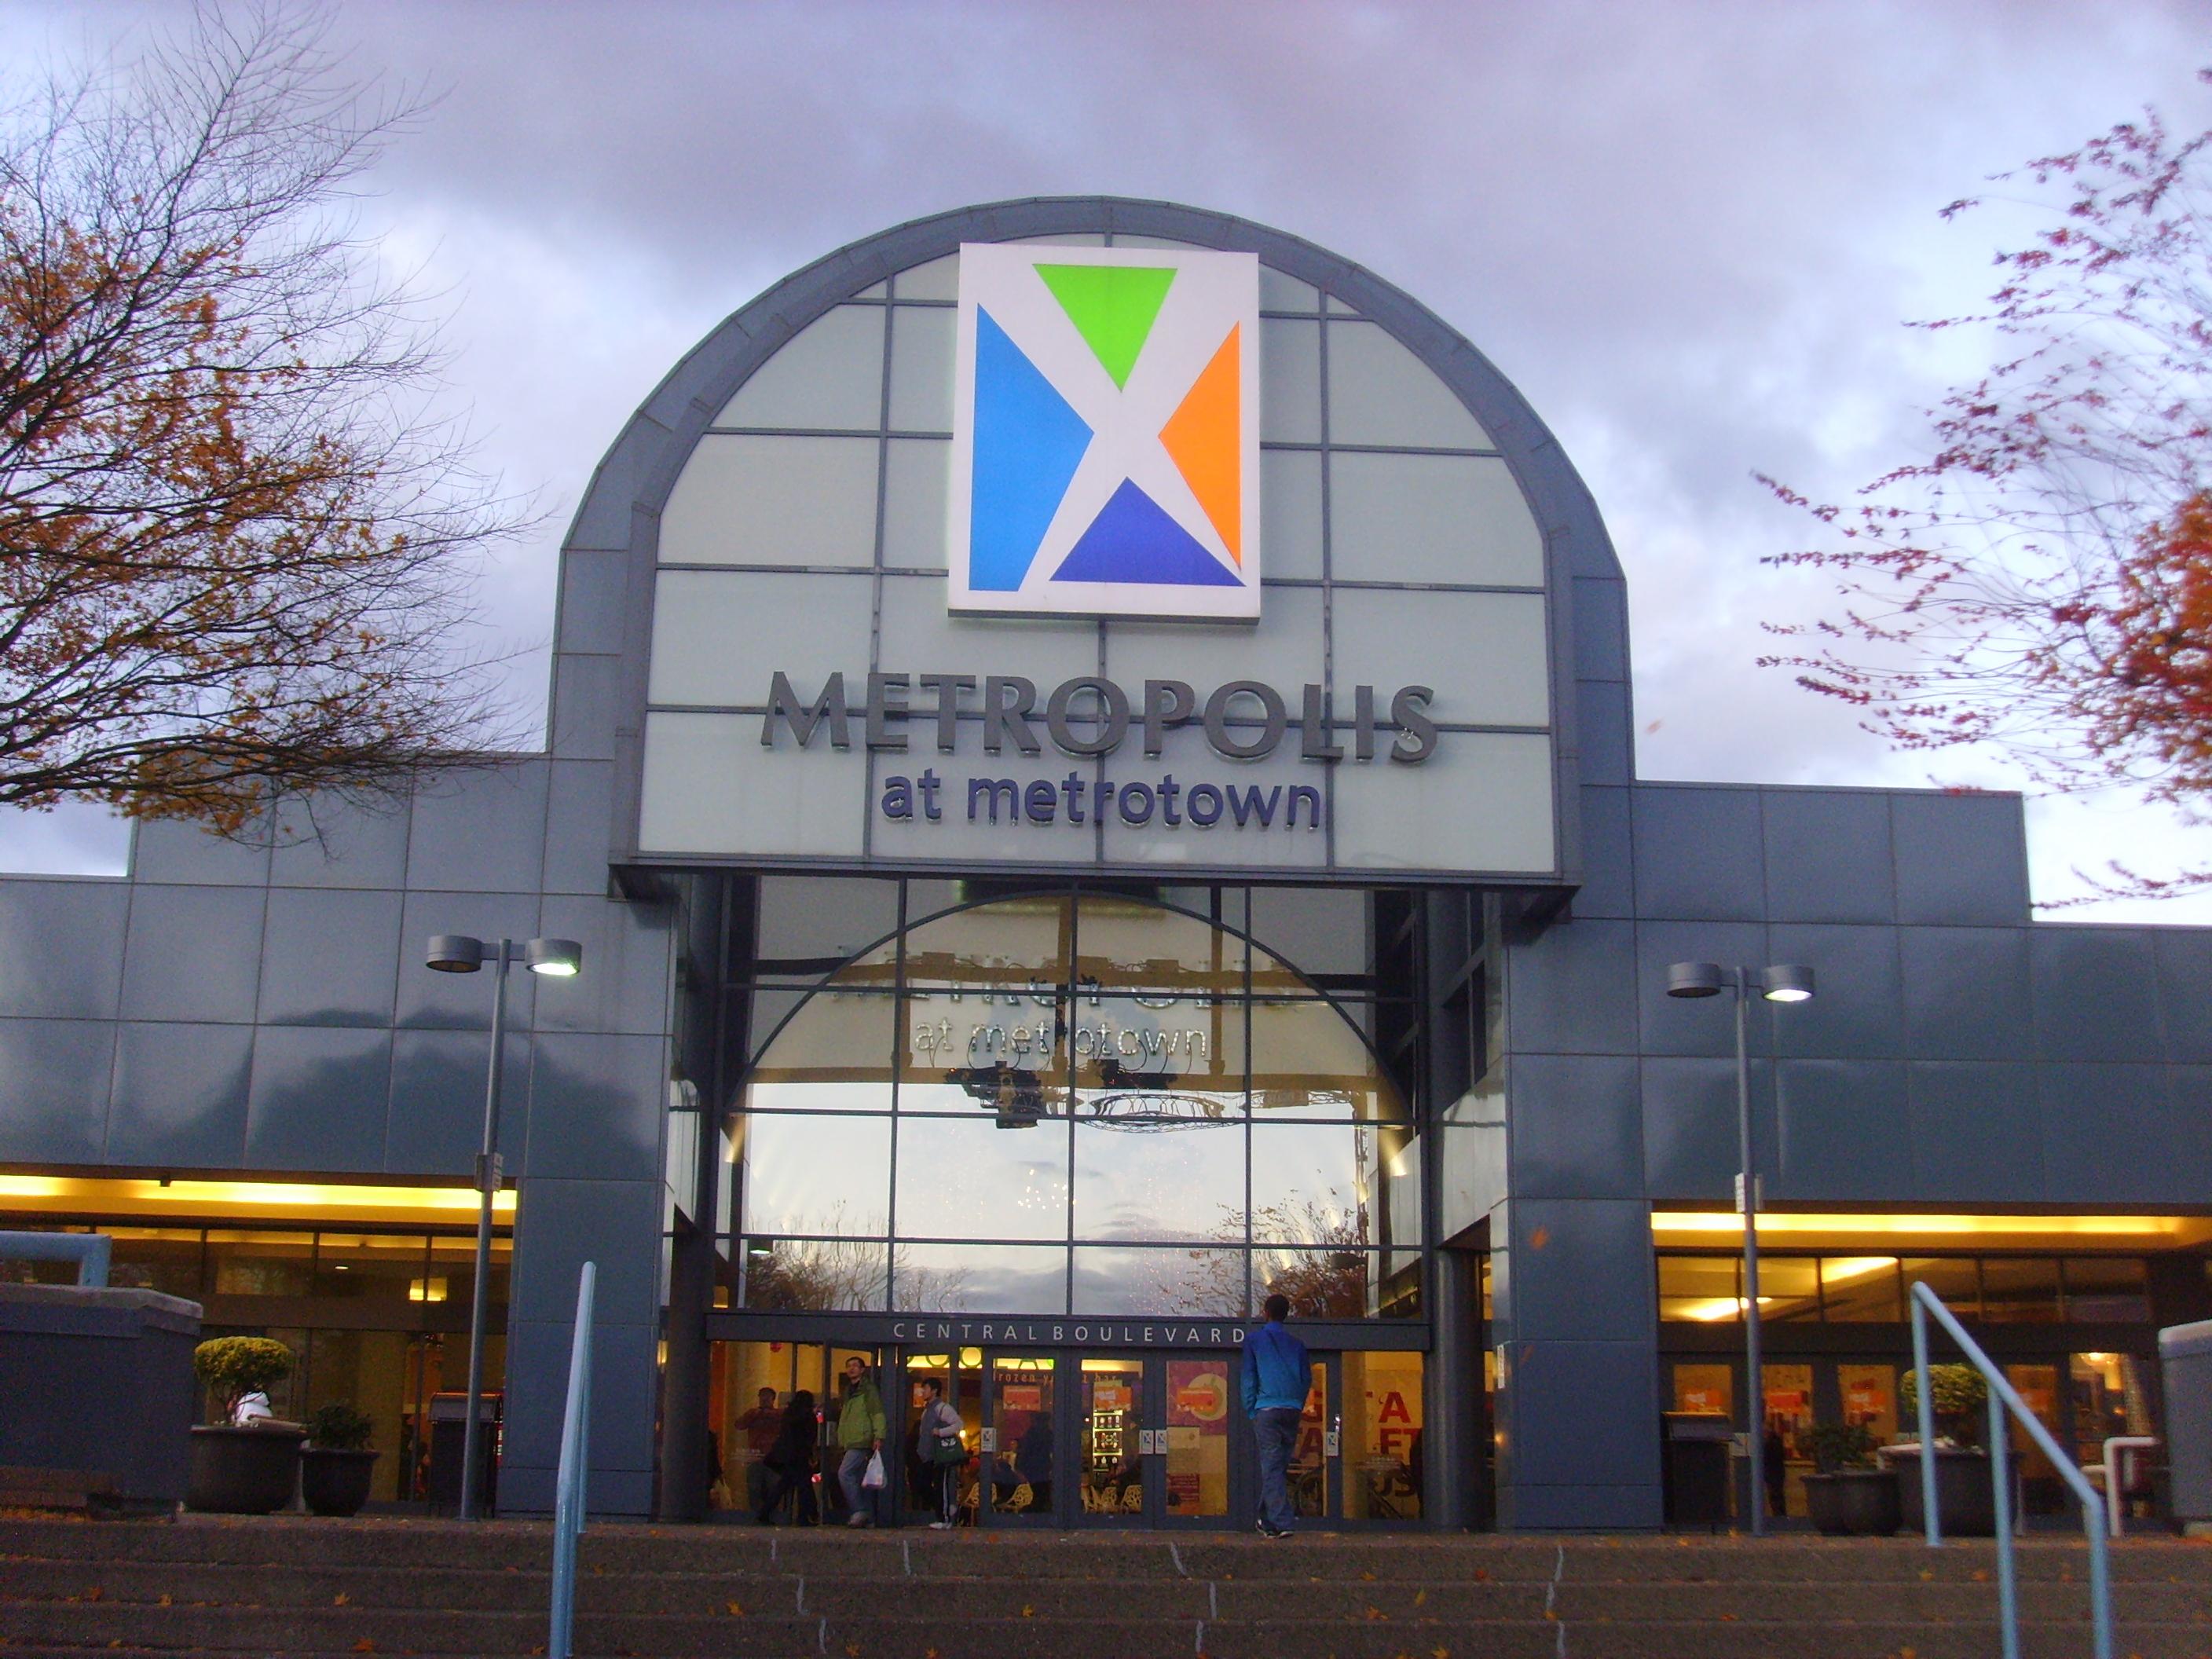 Cover image of this place Metropolis at Metrotown